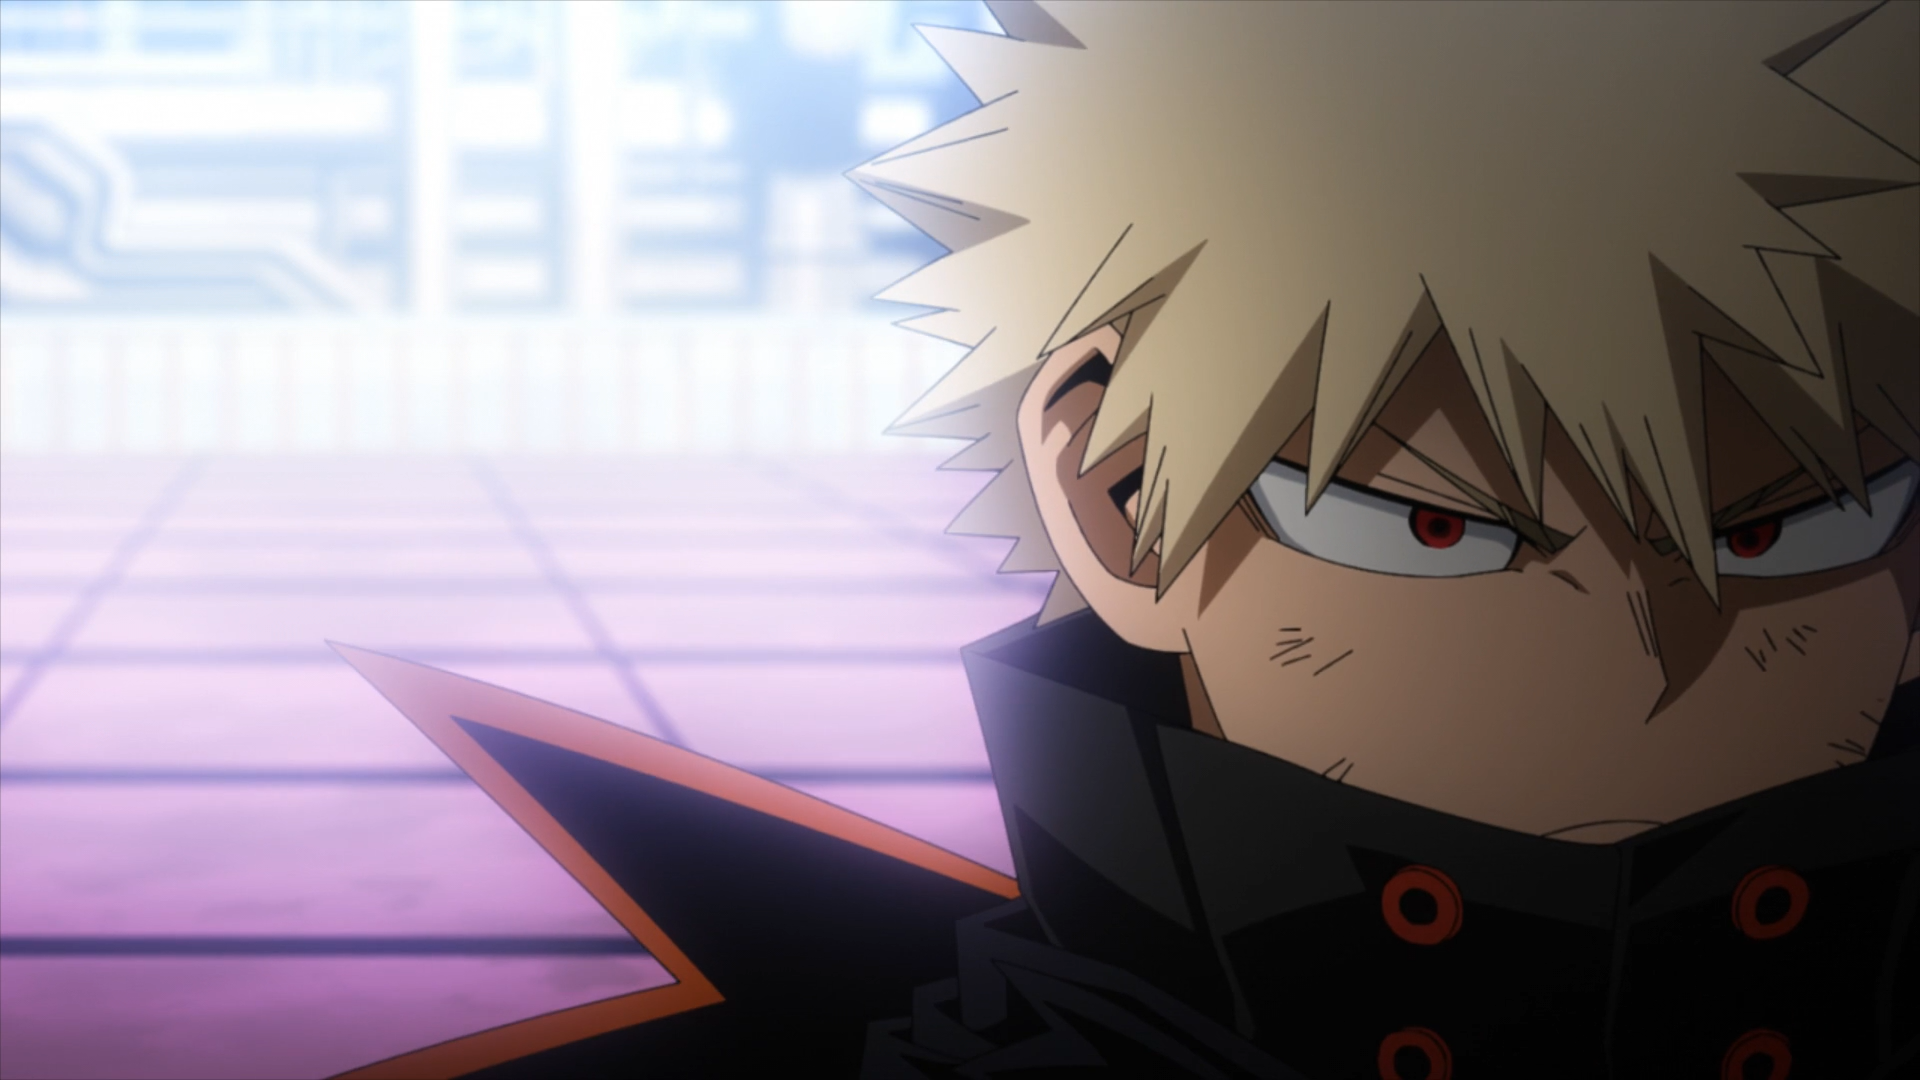 Bakugo walking away after leading his team to a flawless victory.